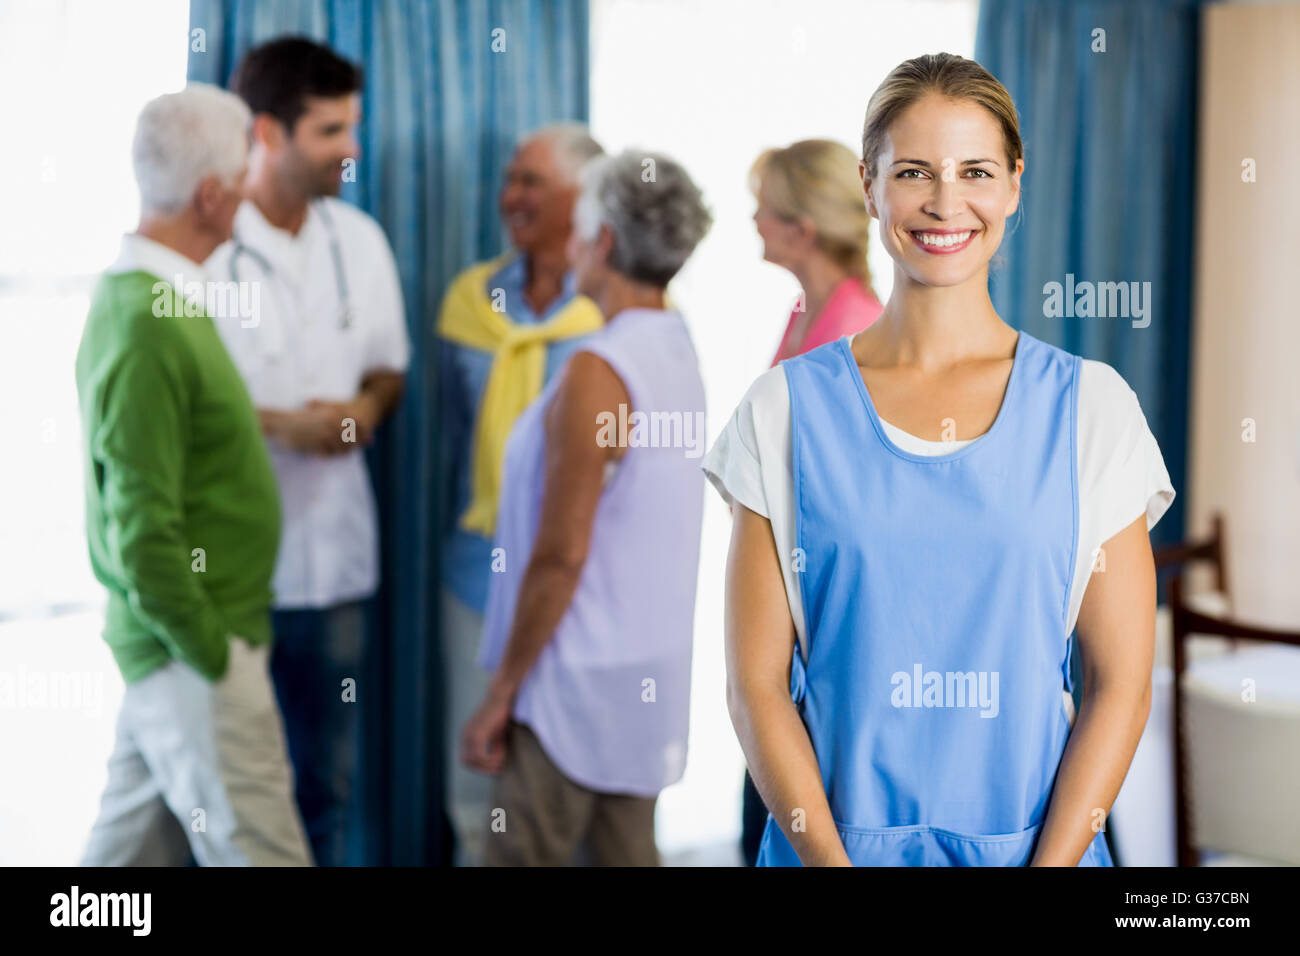 Nurse standing in front of seniors Stock Photo